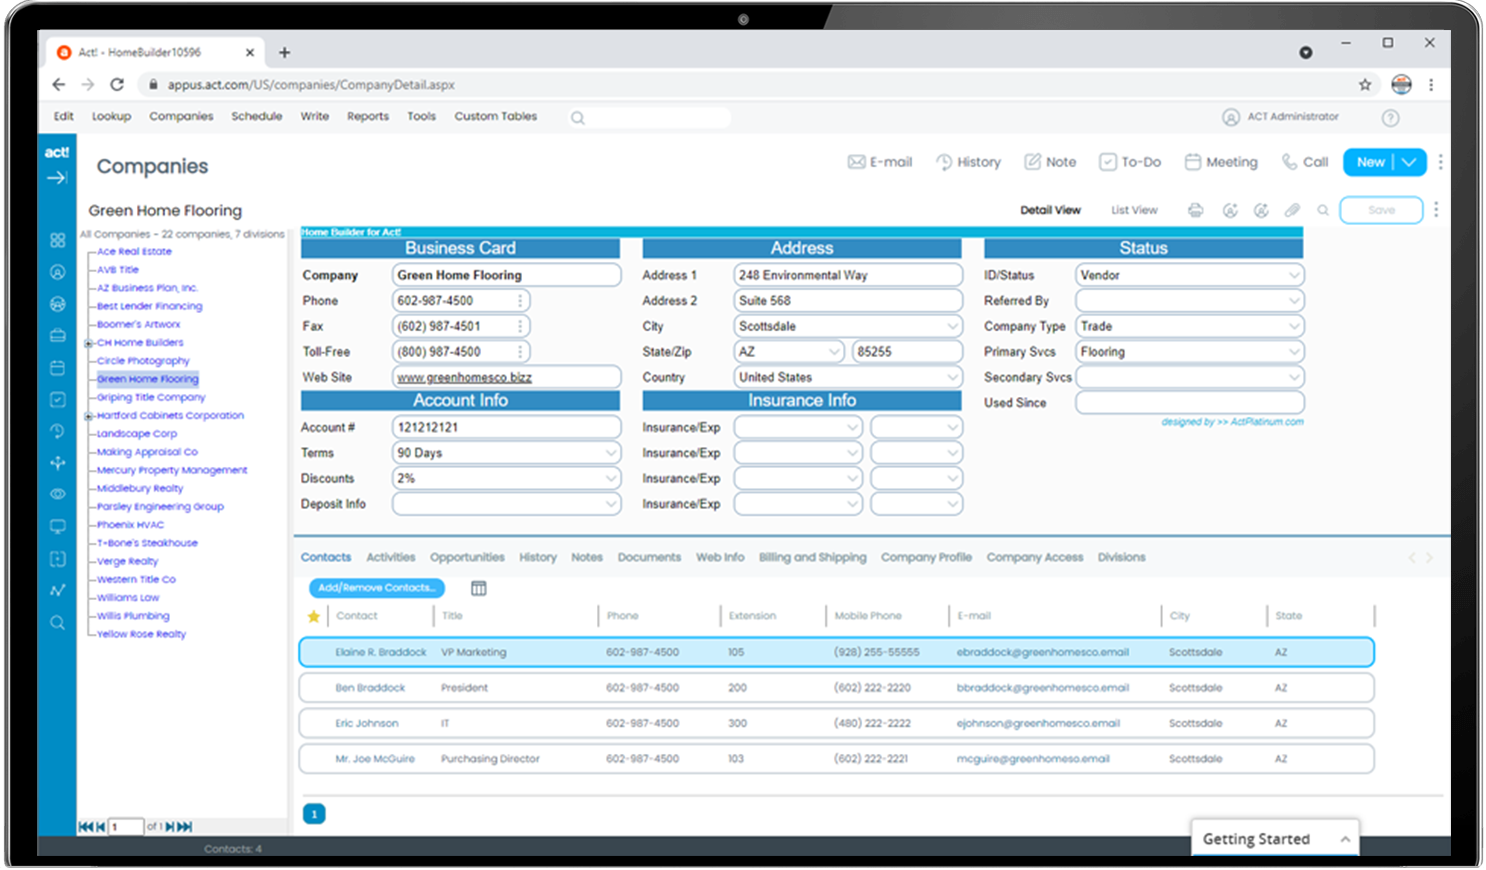 Home Builder CRM Tracks Subscontractors and Suppliers Details